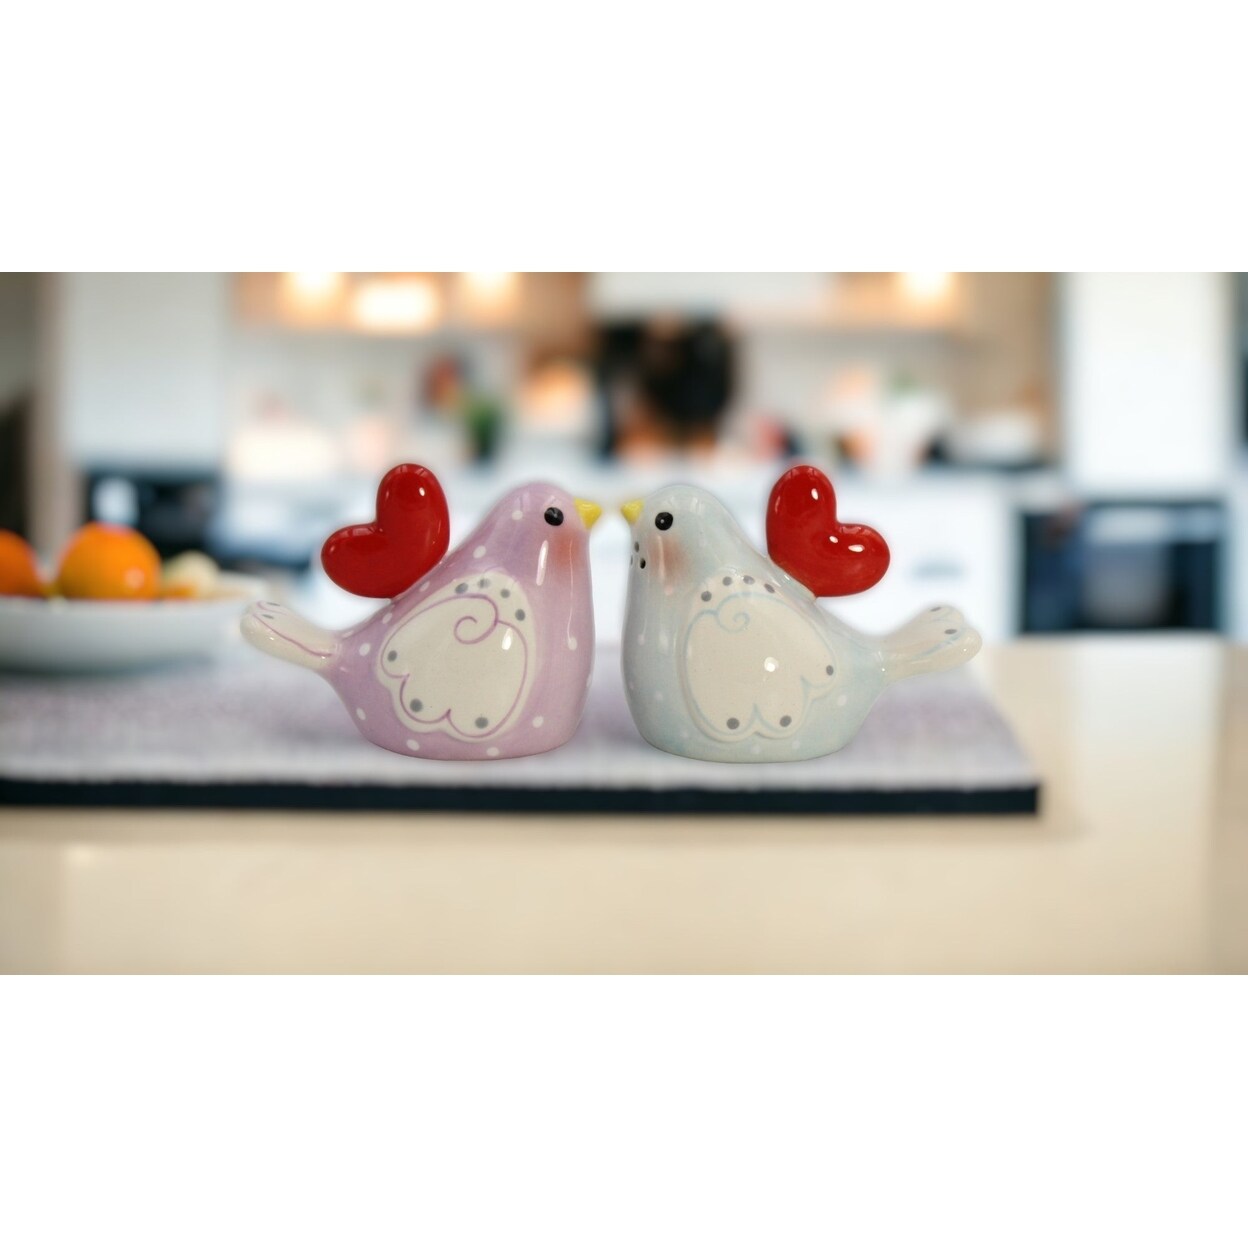 kevinsgiftshoppe Ceramic Birds with Heart Salt and Pepper Shakers Valentines Day Wedding Decor or Gift Anniversary Decor or Gift